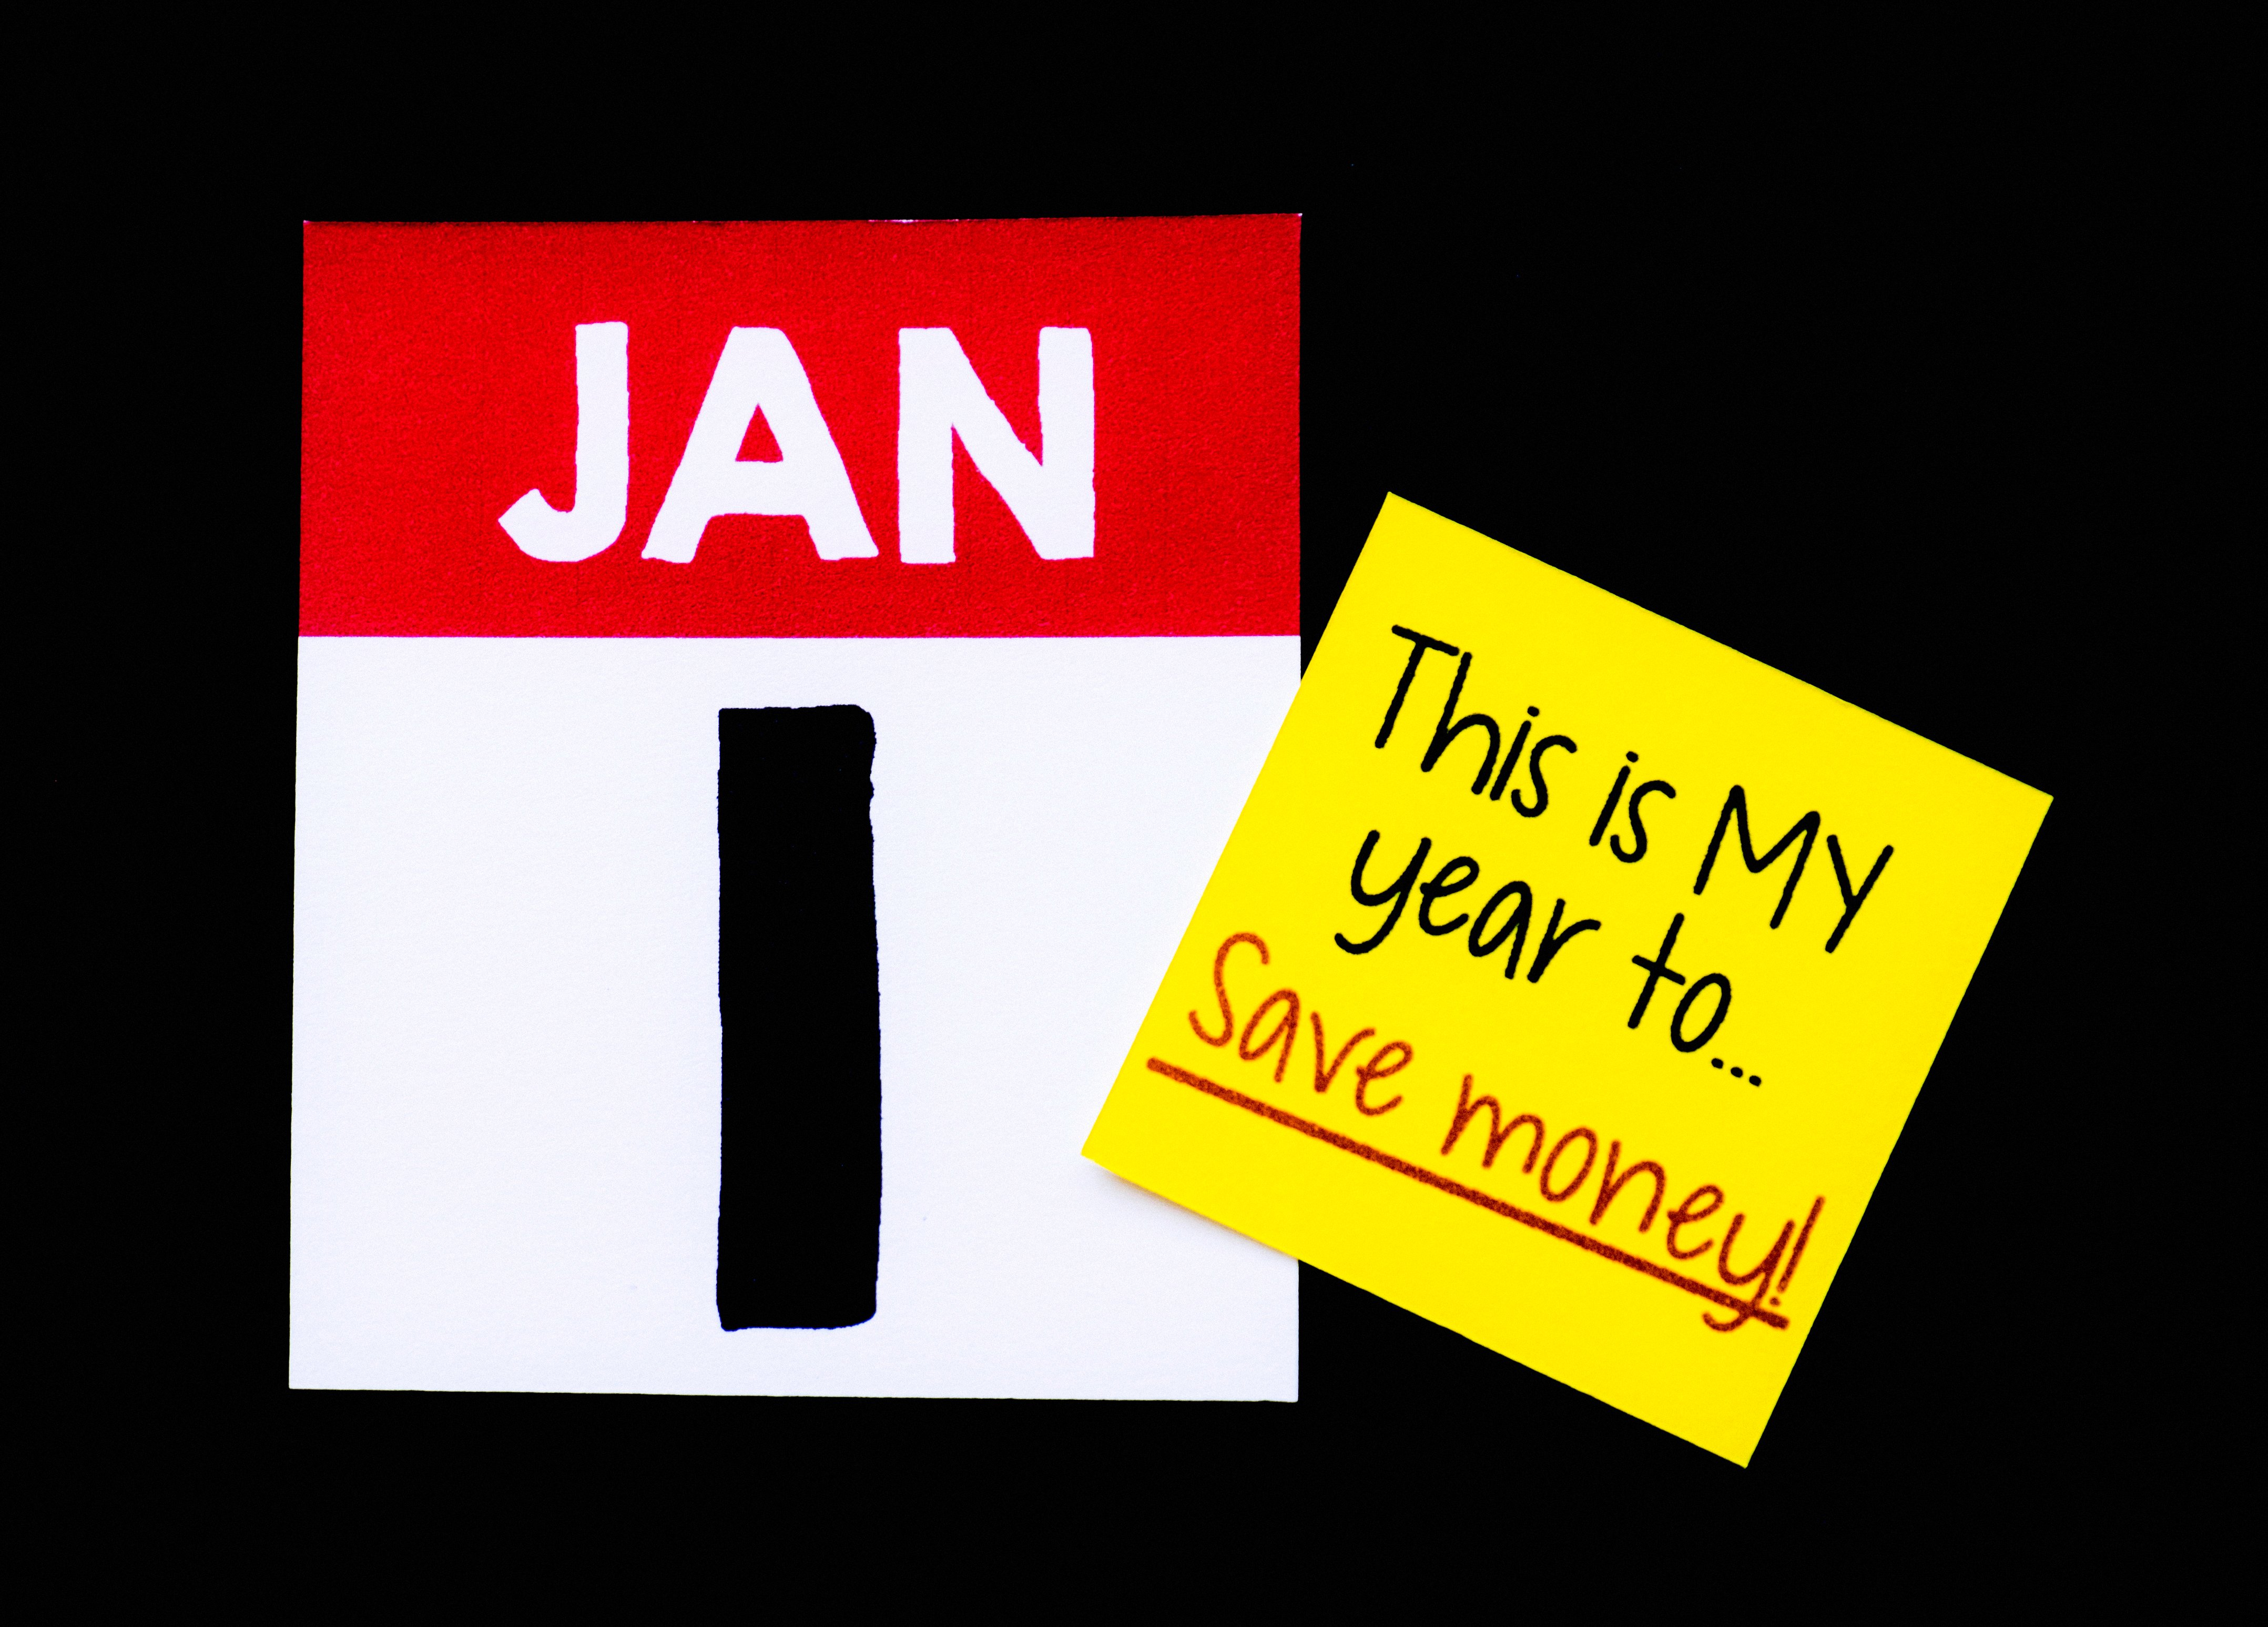 New Year's Resolution to Save Money